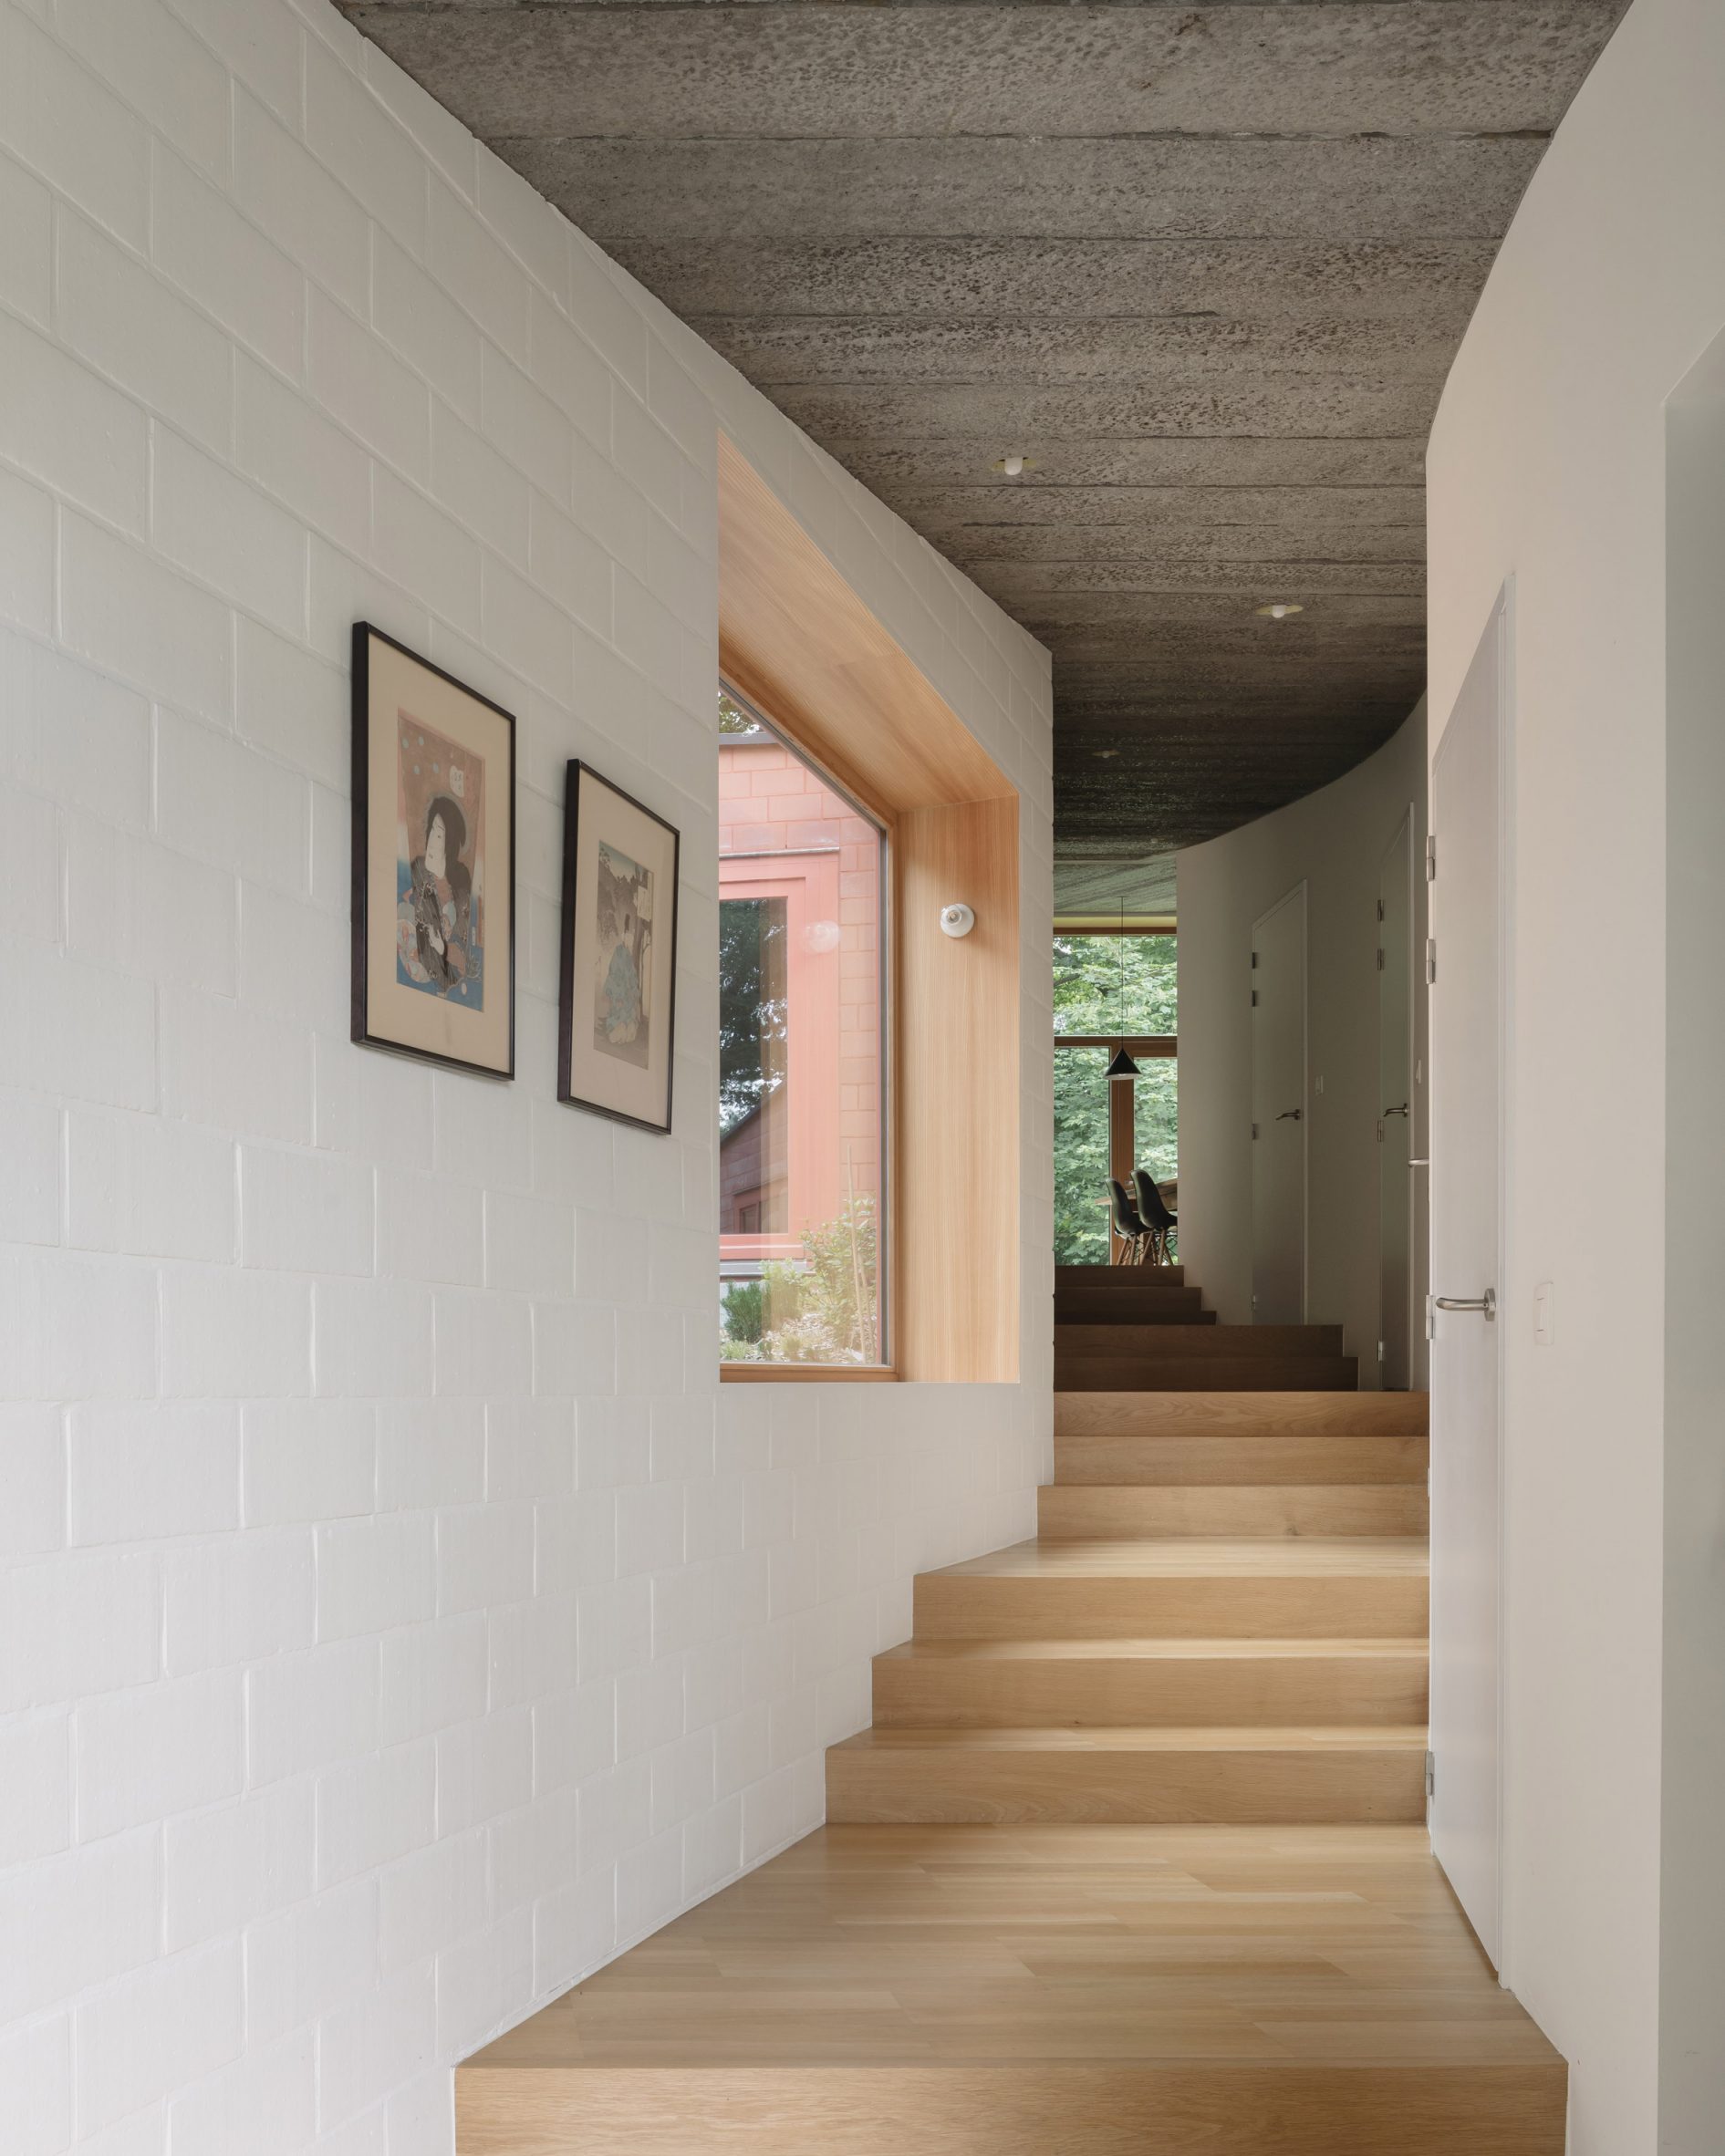 Footbridge in the house by Bovenbouw Architectuur